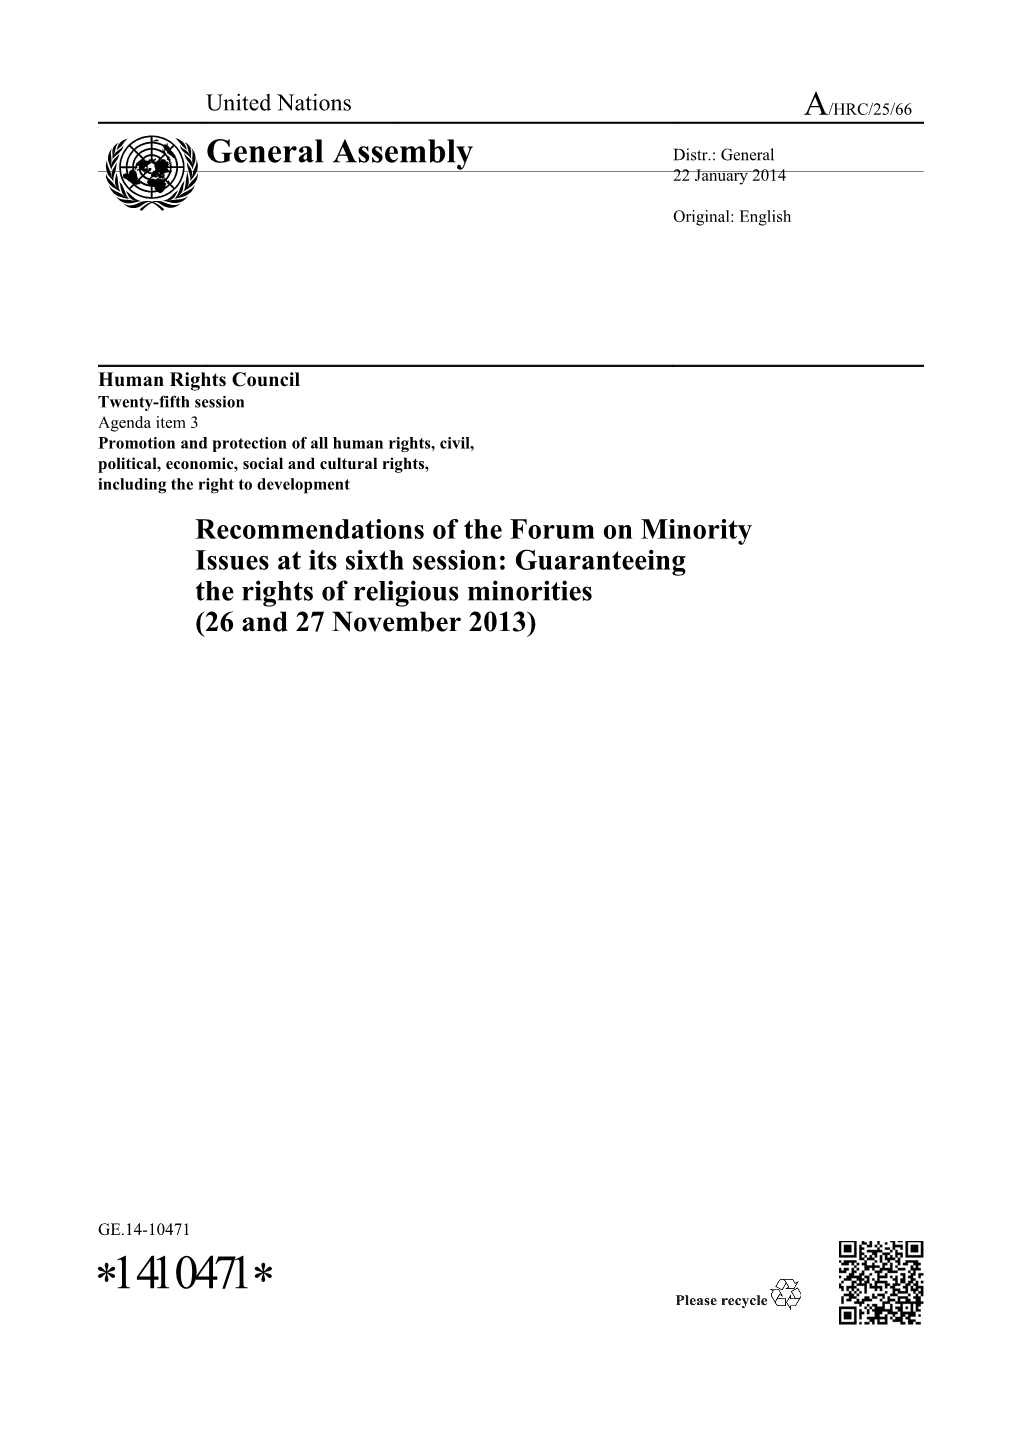 Recommendations of the Forum on Minority Issues at Its Sixth Session: Guaranteeing The